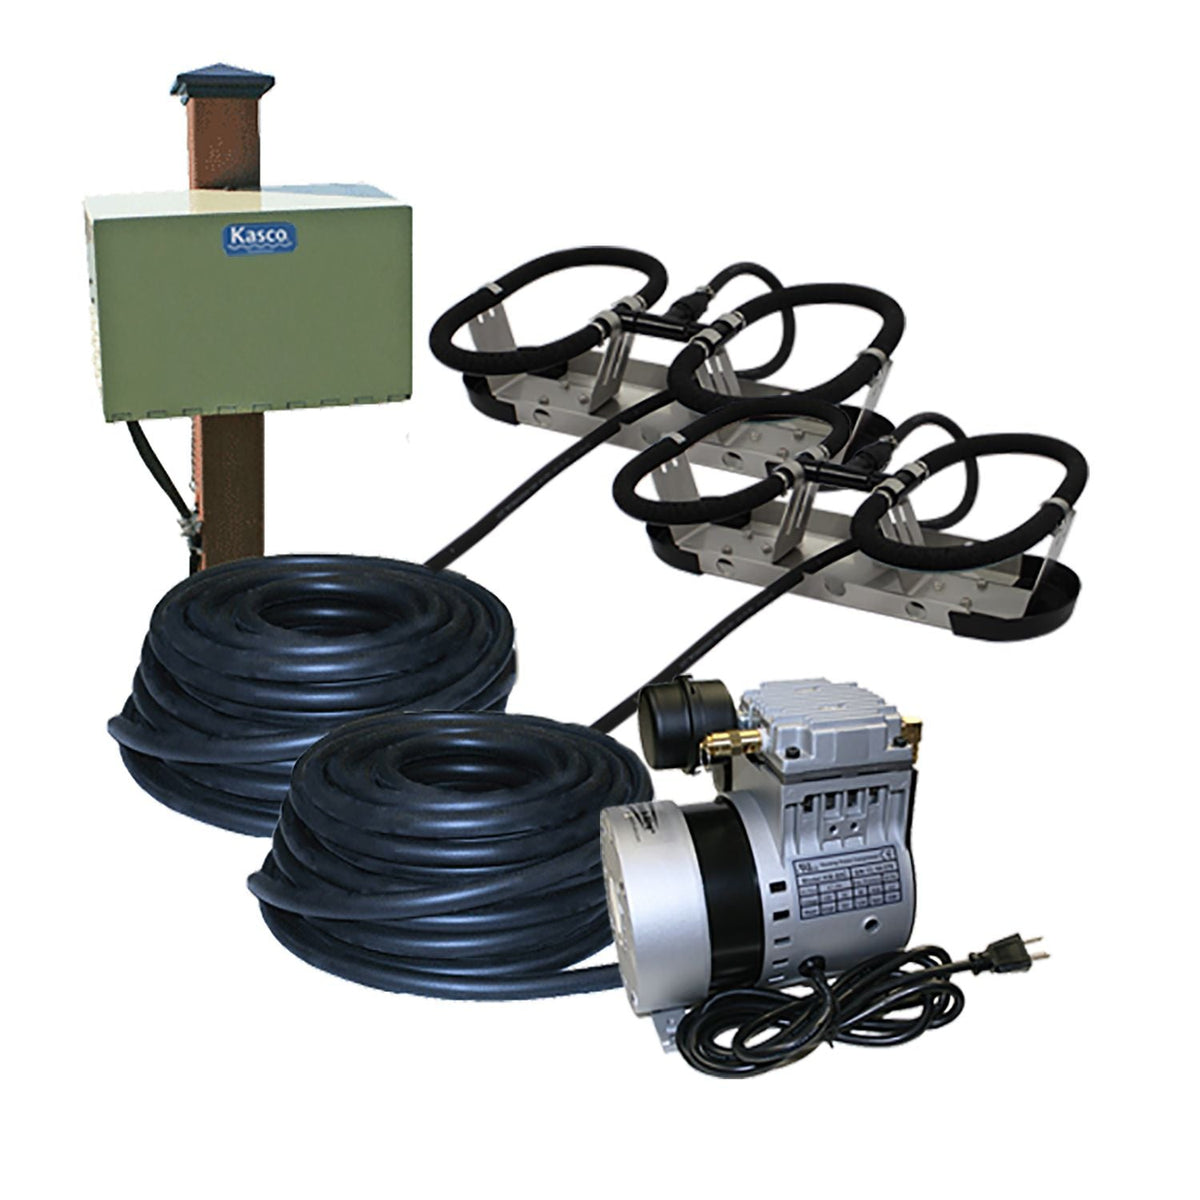 Kasco Marine Robust-Aire™ System 2 Diffused Aeration